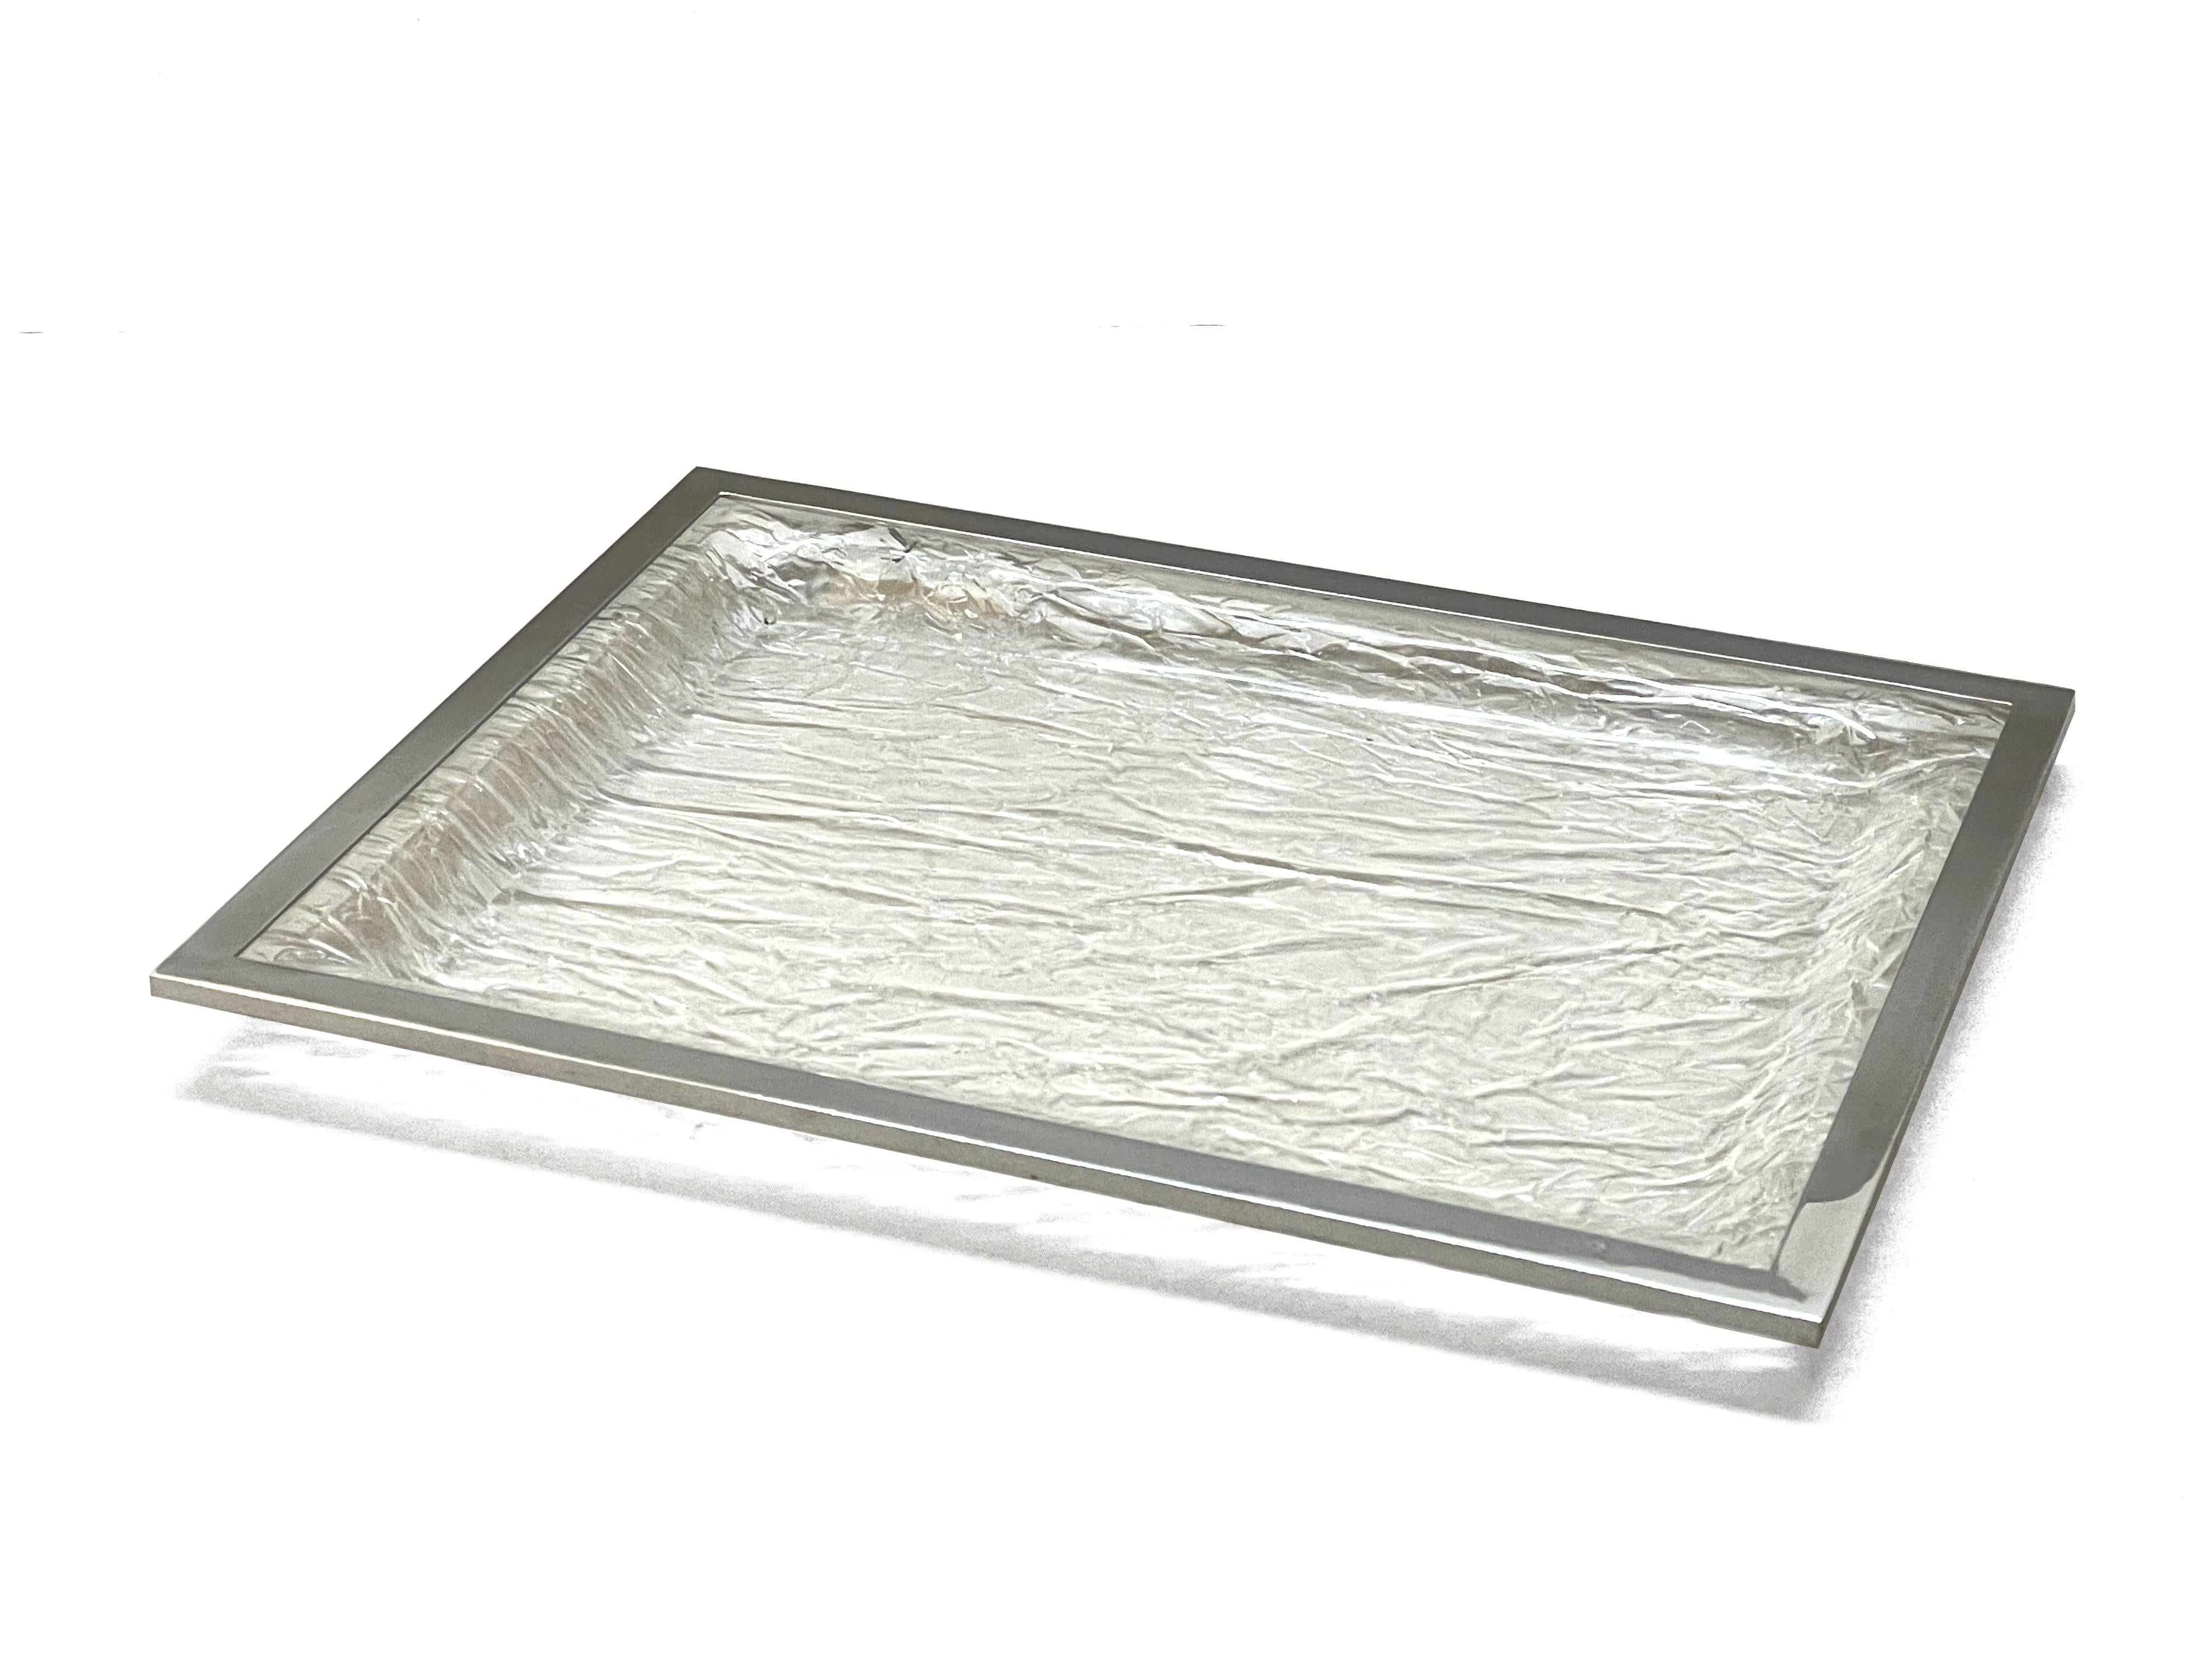 Midcentury Crystal Lucite and Chrome Italian Tray in Willy Rizzo Style, 1970s For Sale 3